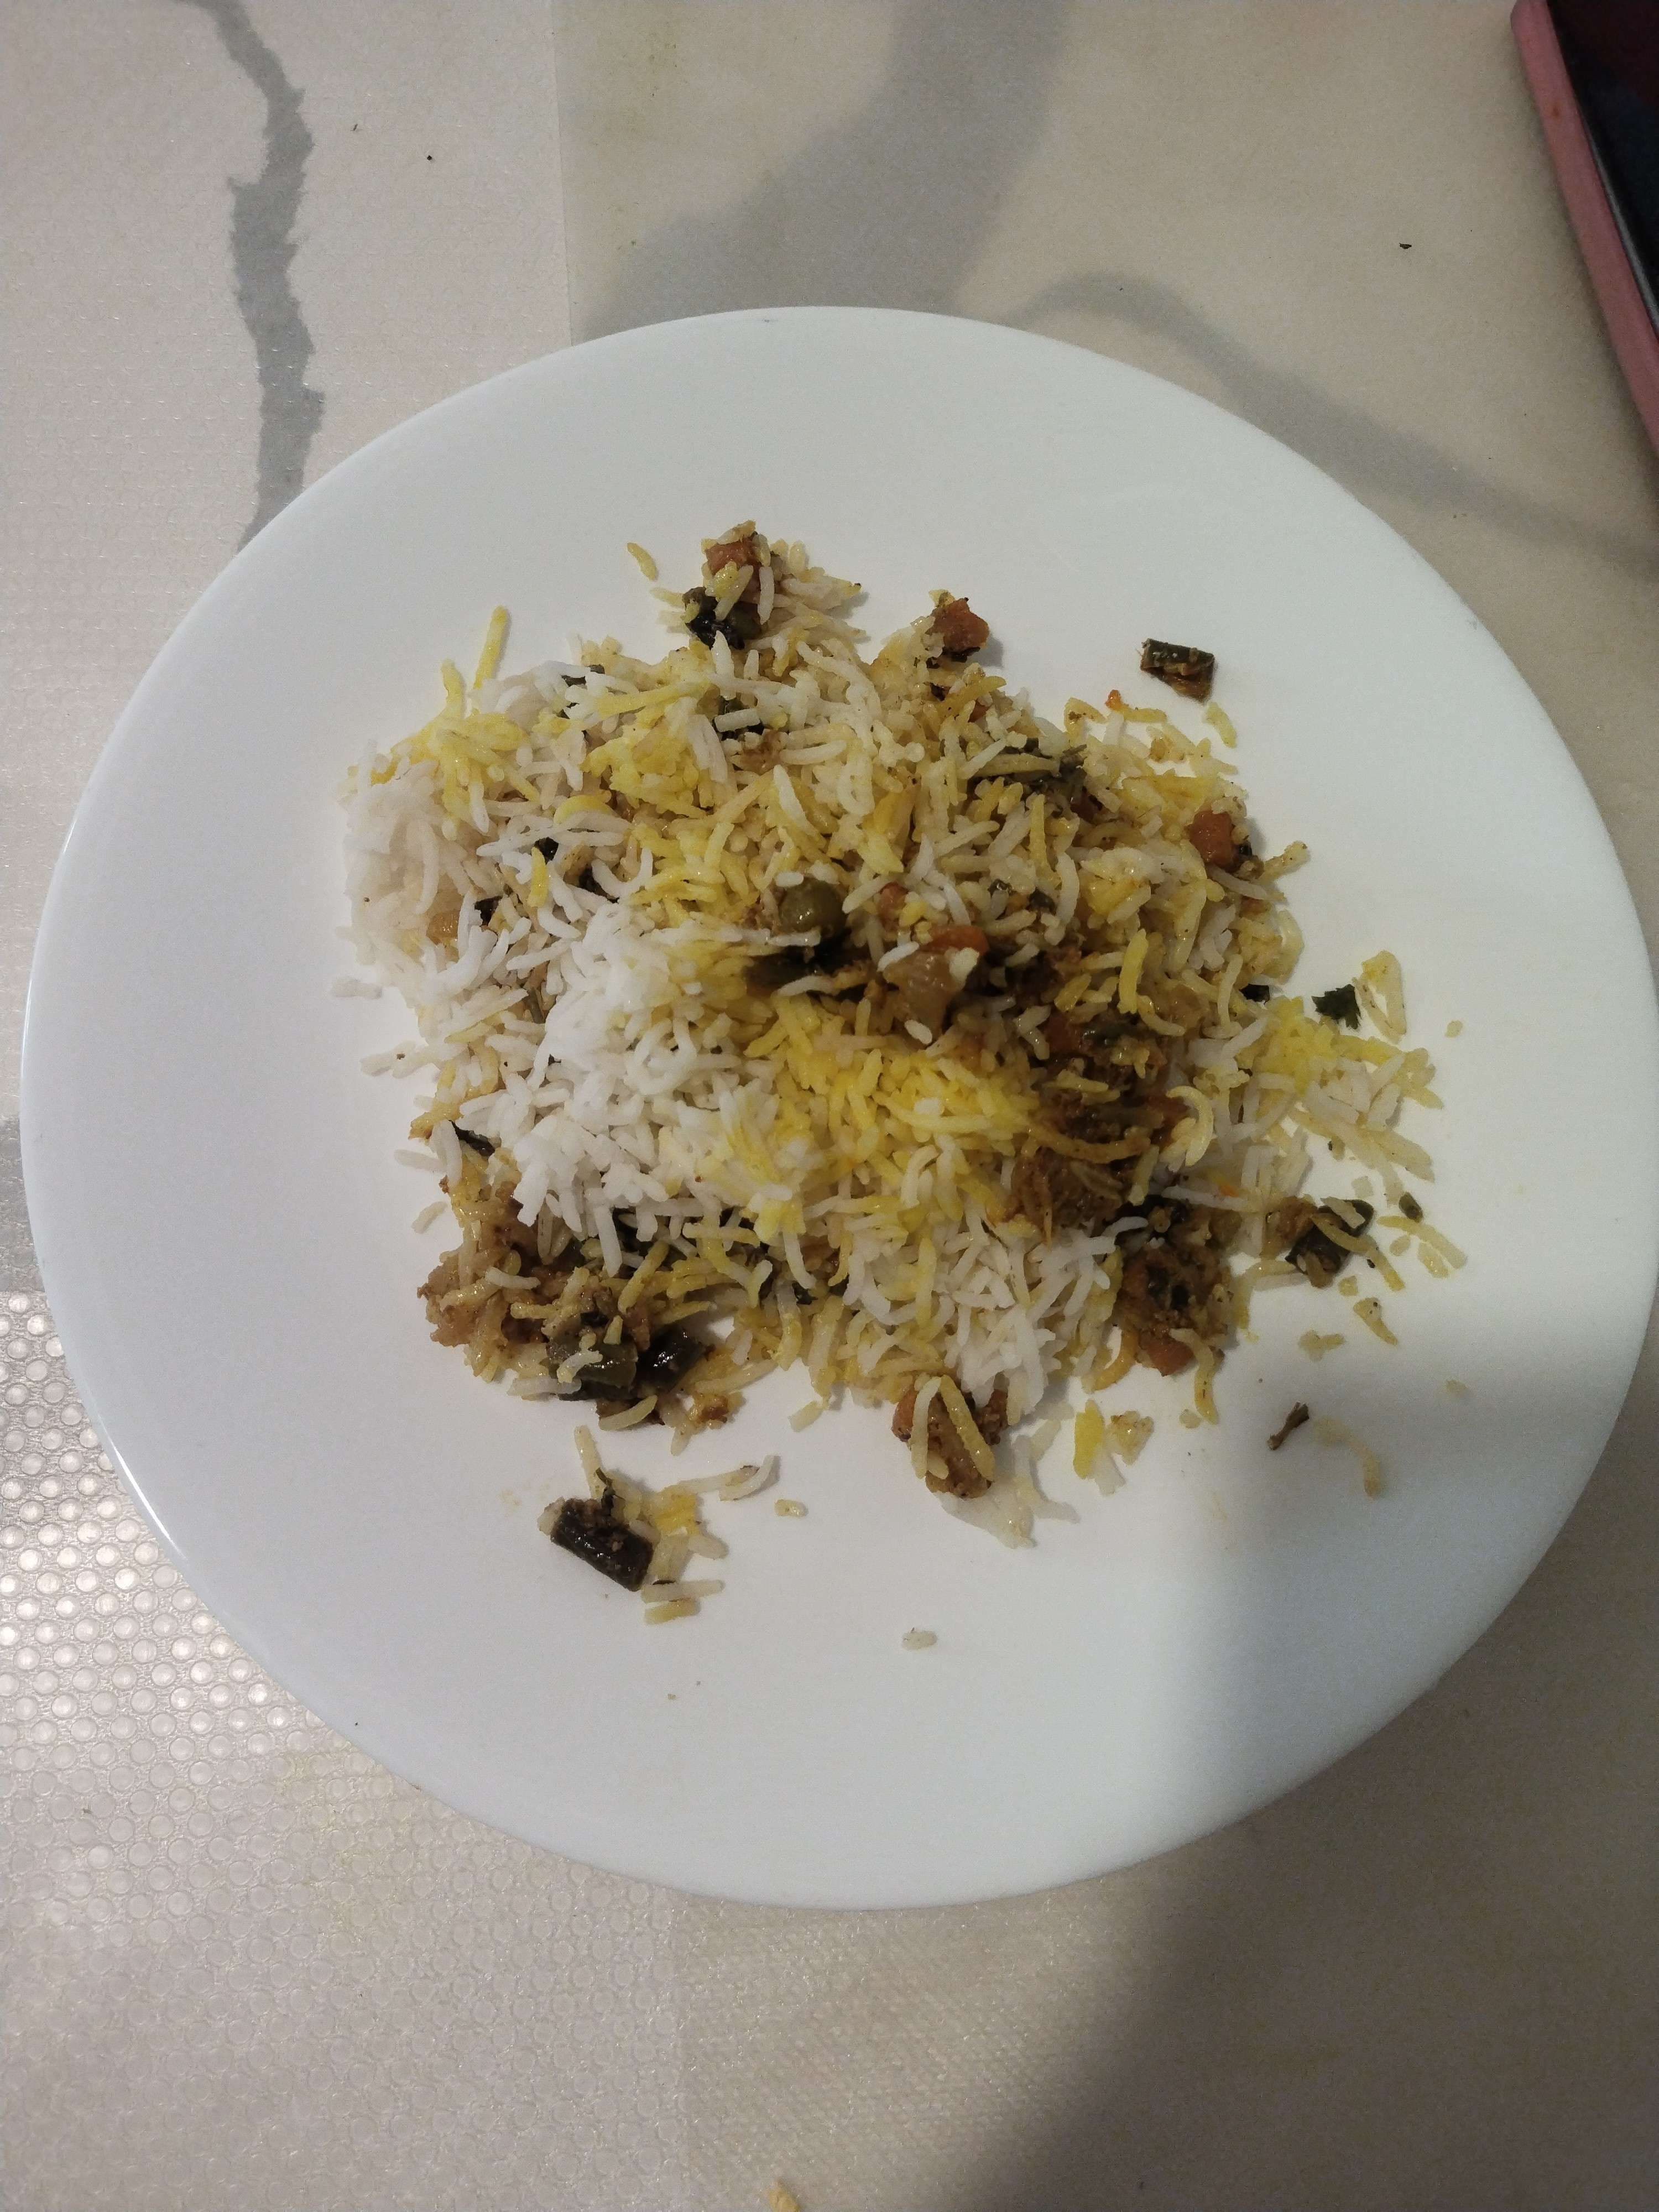 Tasty Veg Biryani cooked by COOX chefs cooks during occasions parties events at home